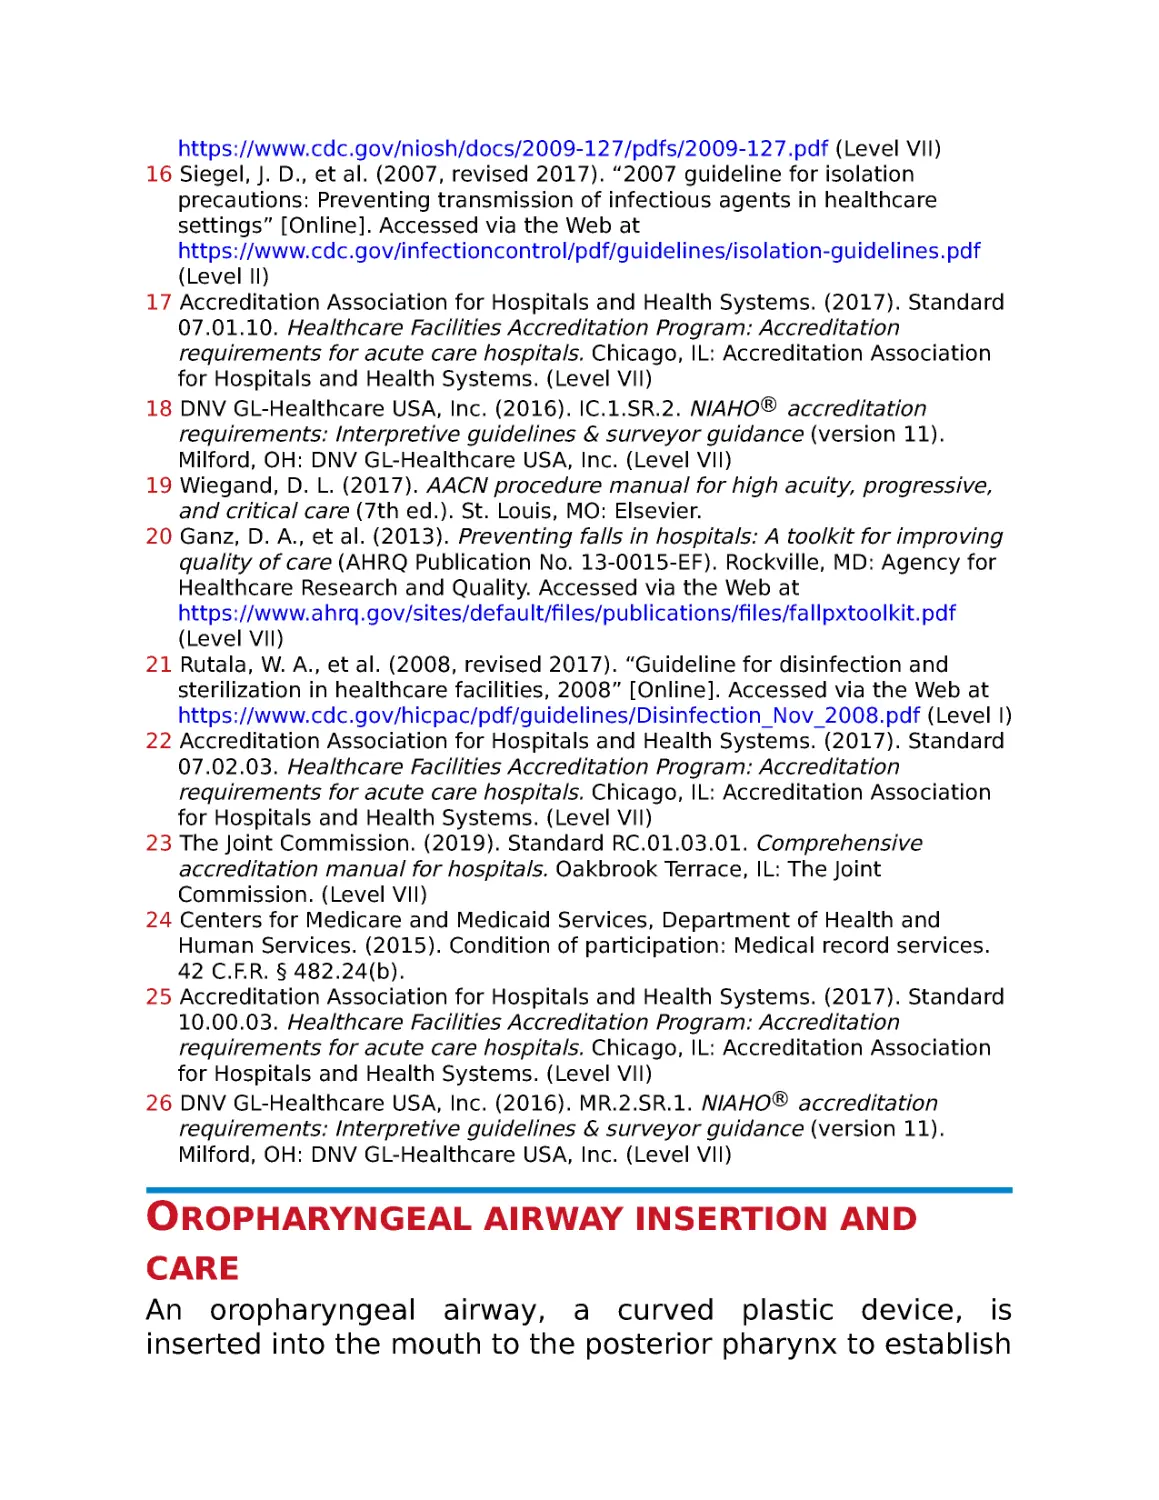 Oropharyngeal airway insertion and care